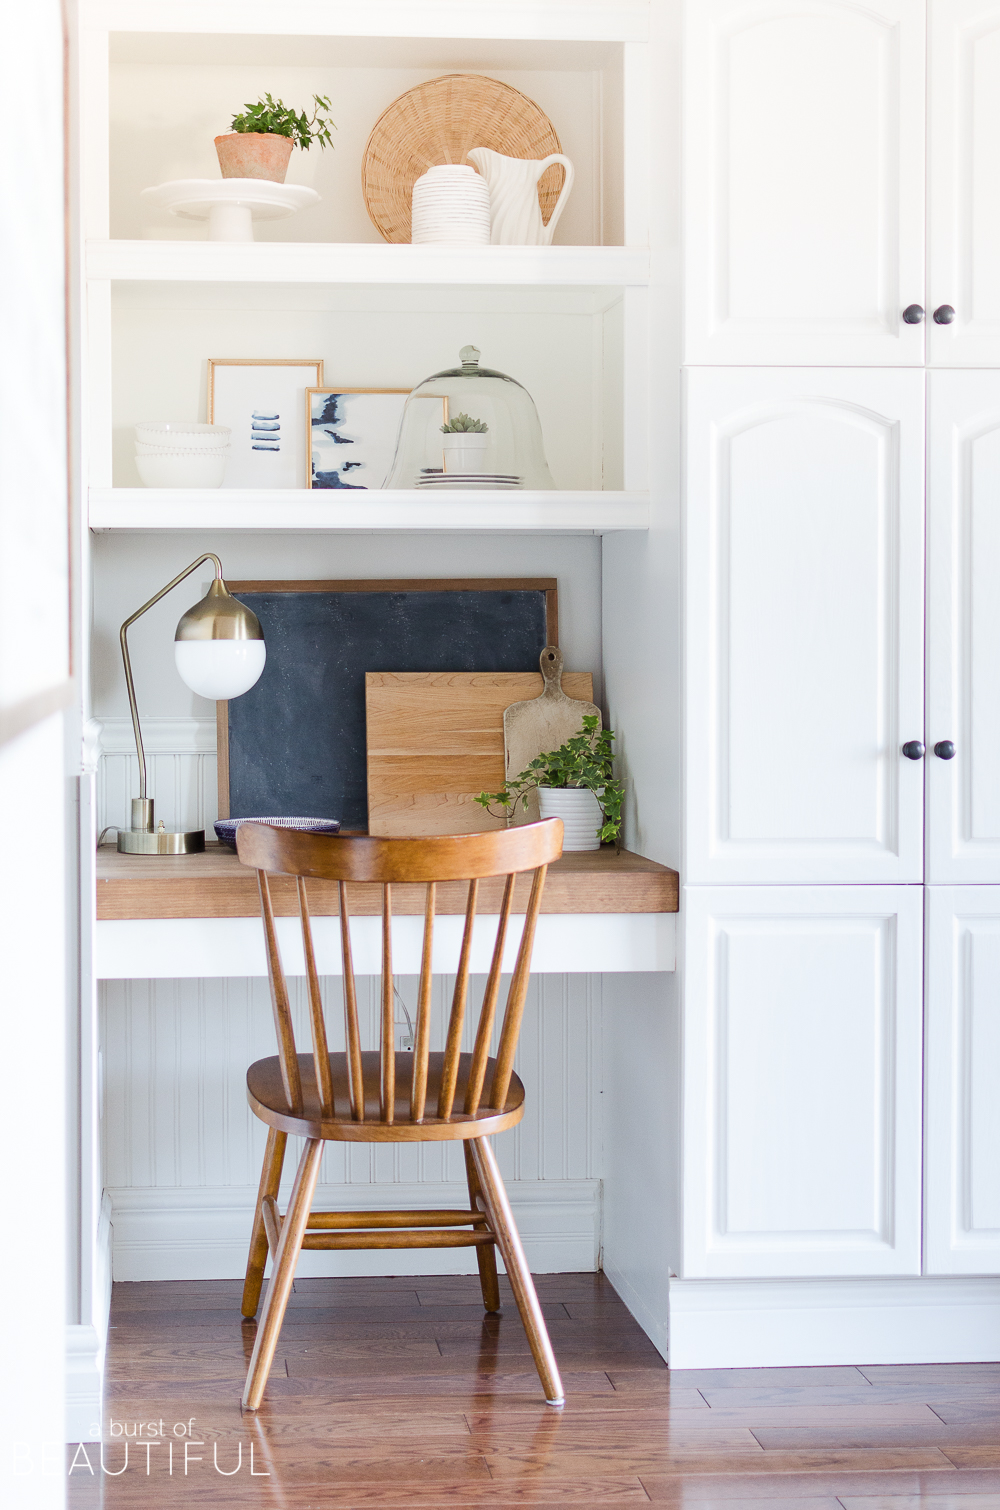 A few subtle changes are all you need to welcome the spring season into your home. Join us on our spring home tour, along with 25 other bloggers to find inspiration and spring decor ideas.